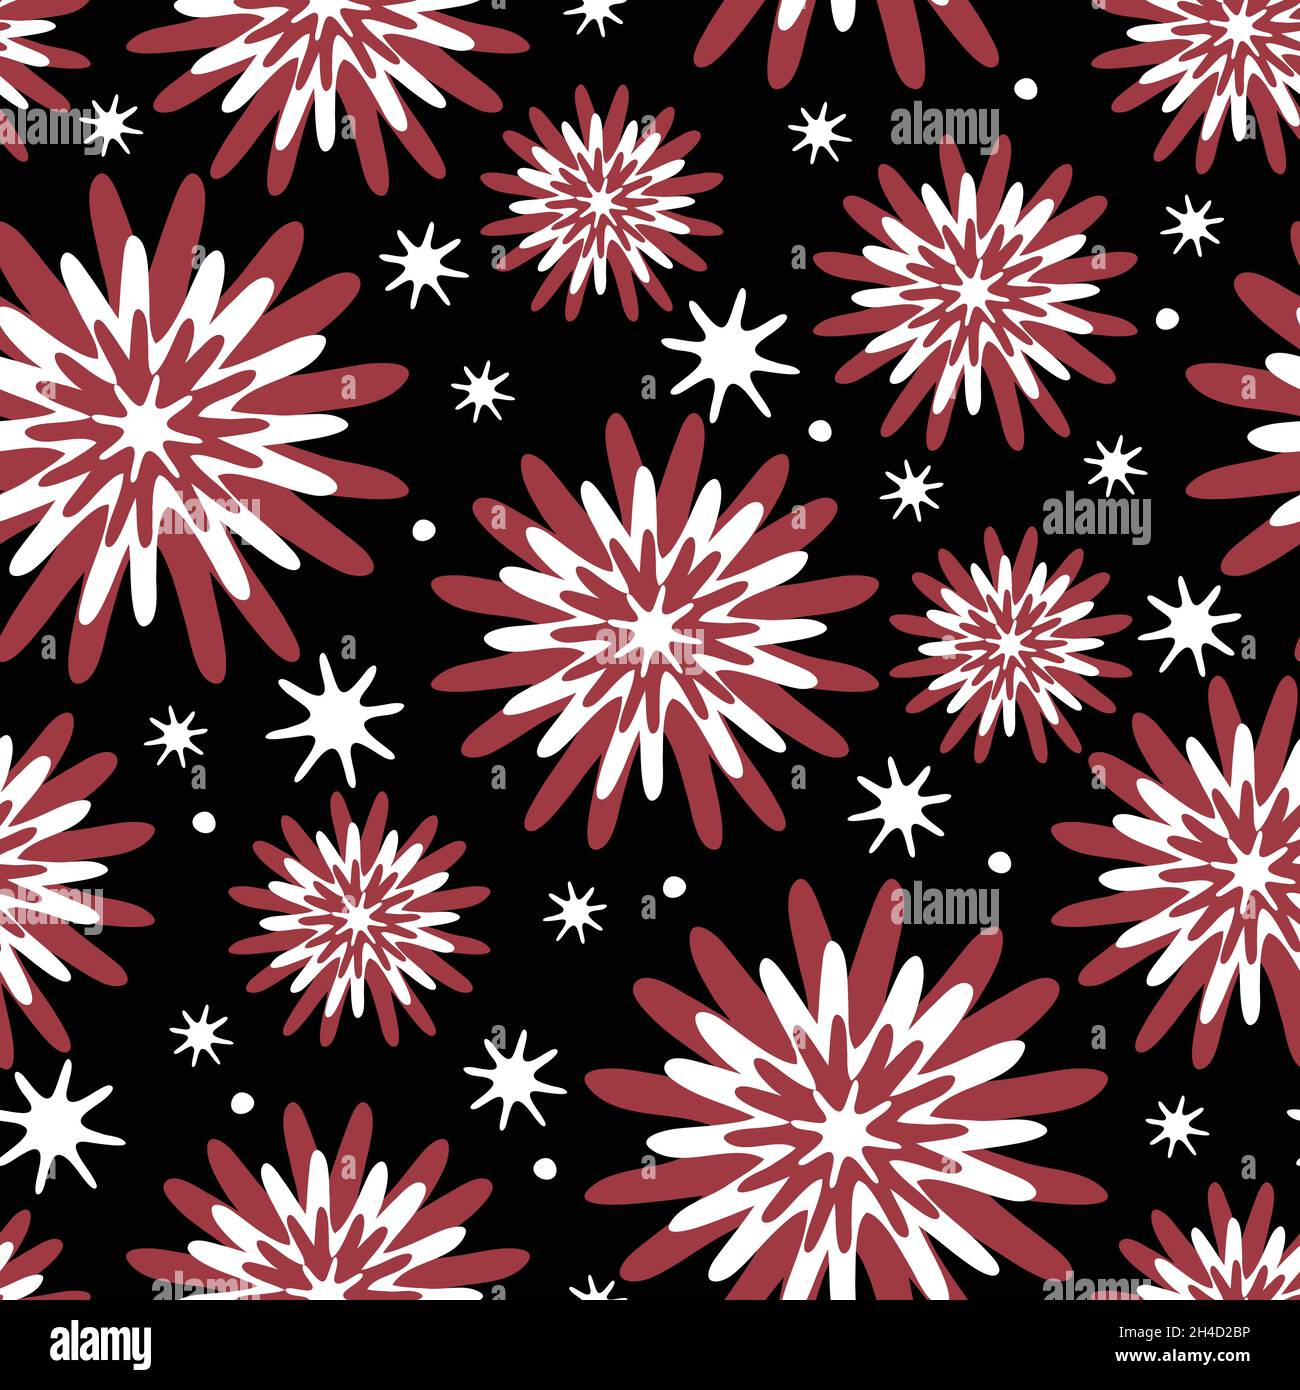 Seamless vector pattern with flower burst on black background. Abstract floral wallpaper design with stars. Starburst fashion textile texture. Stock Vector